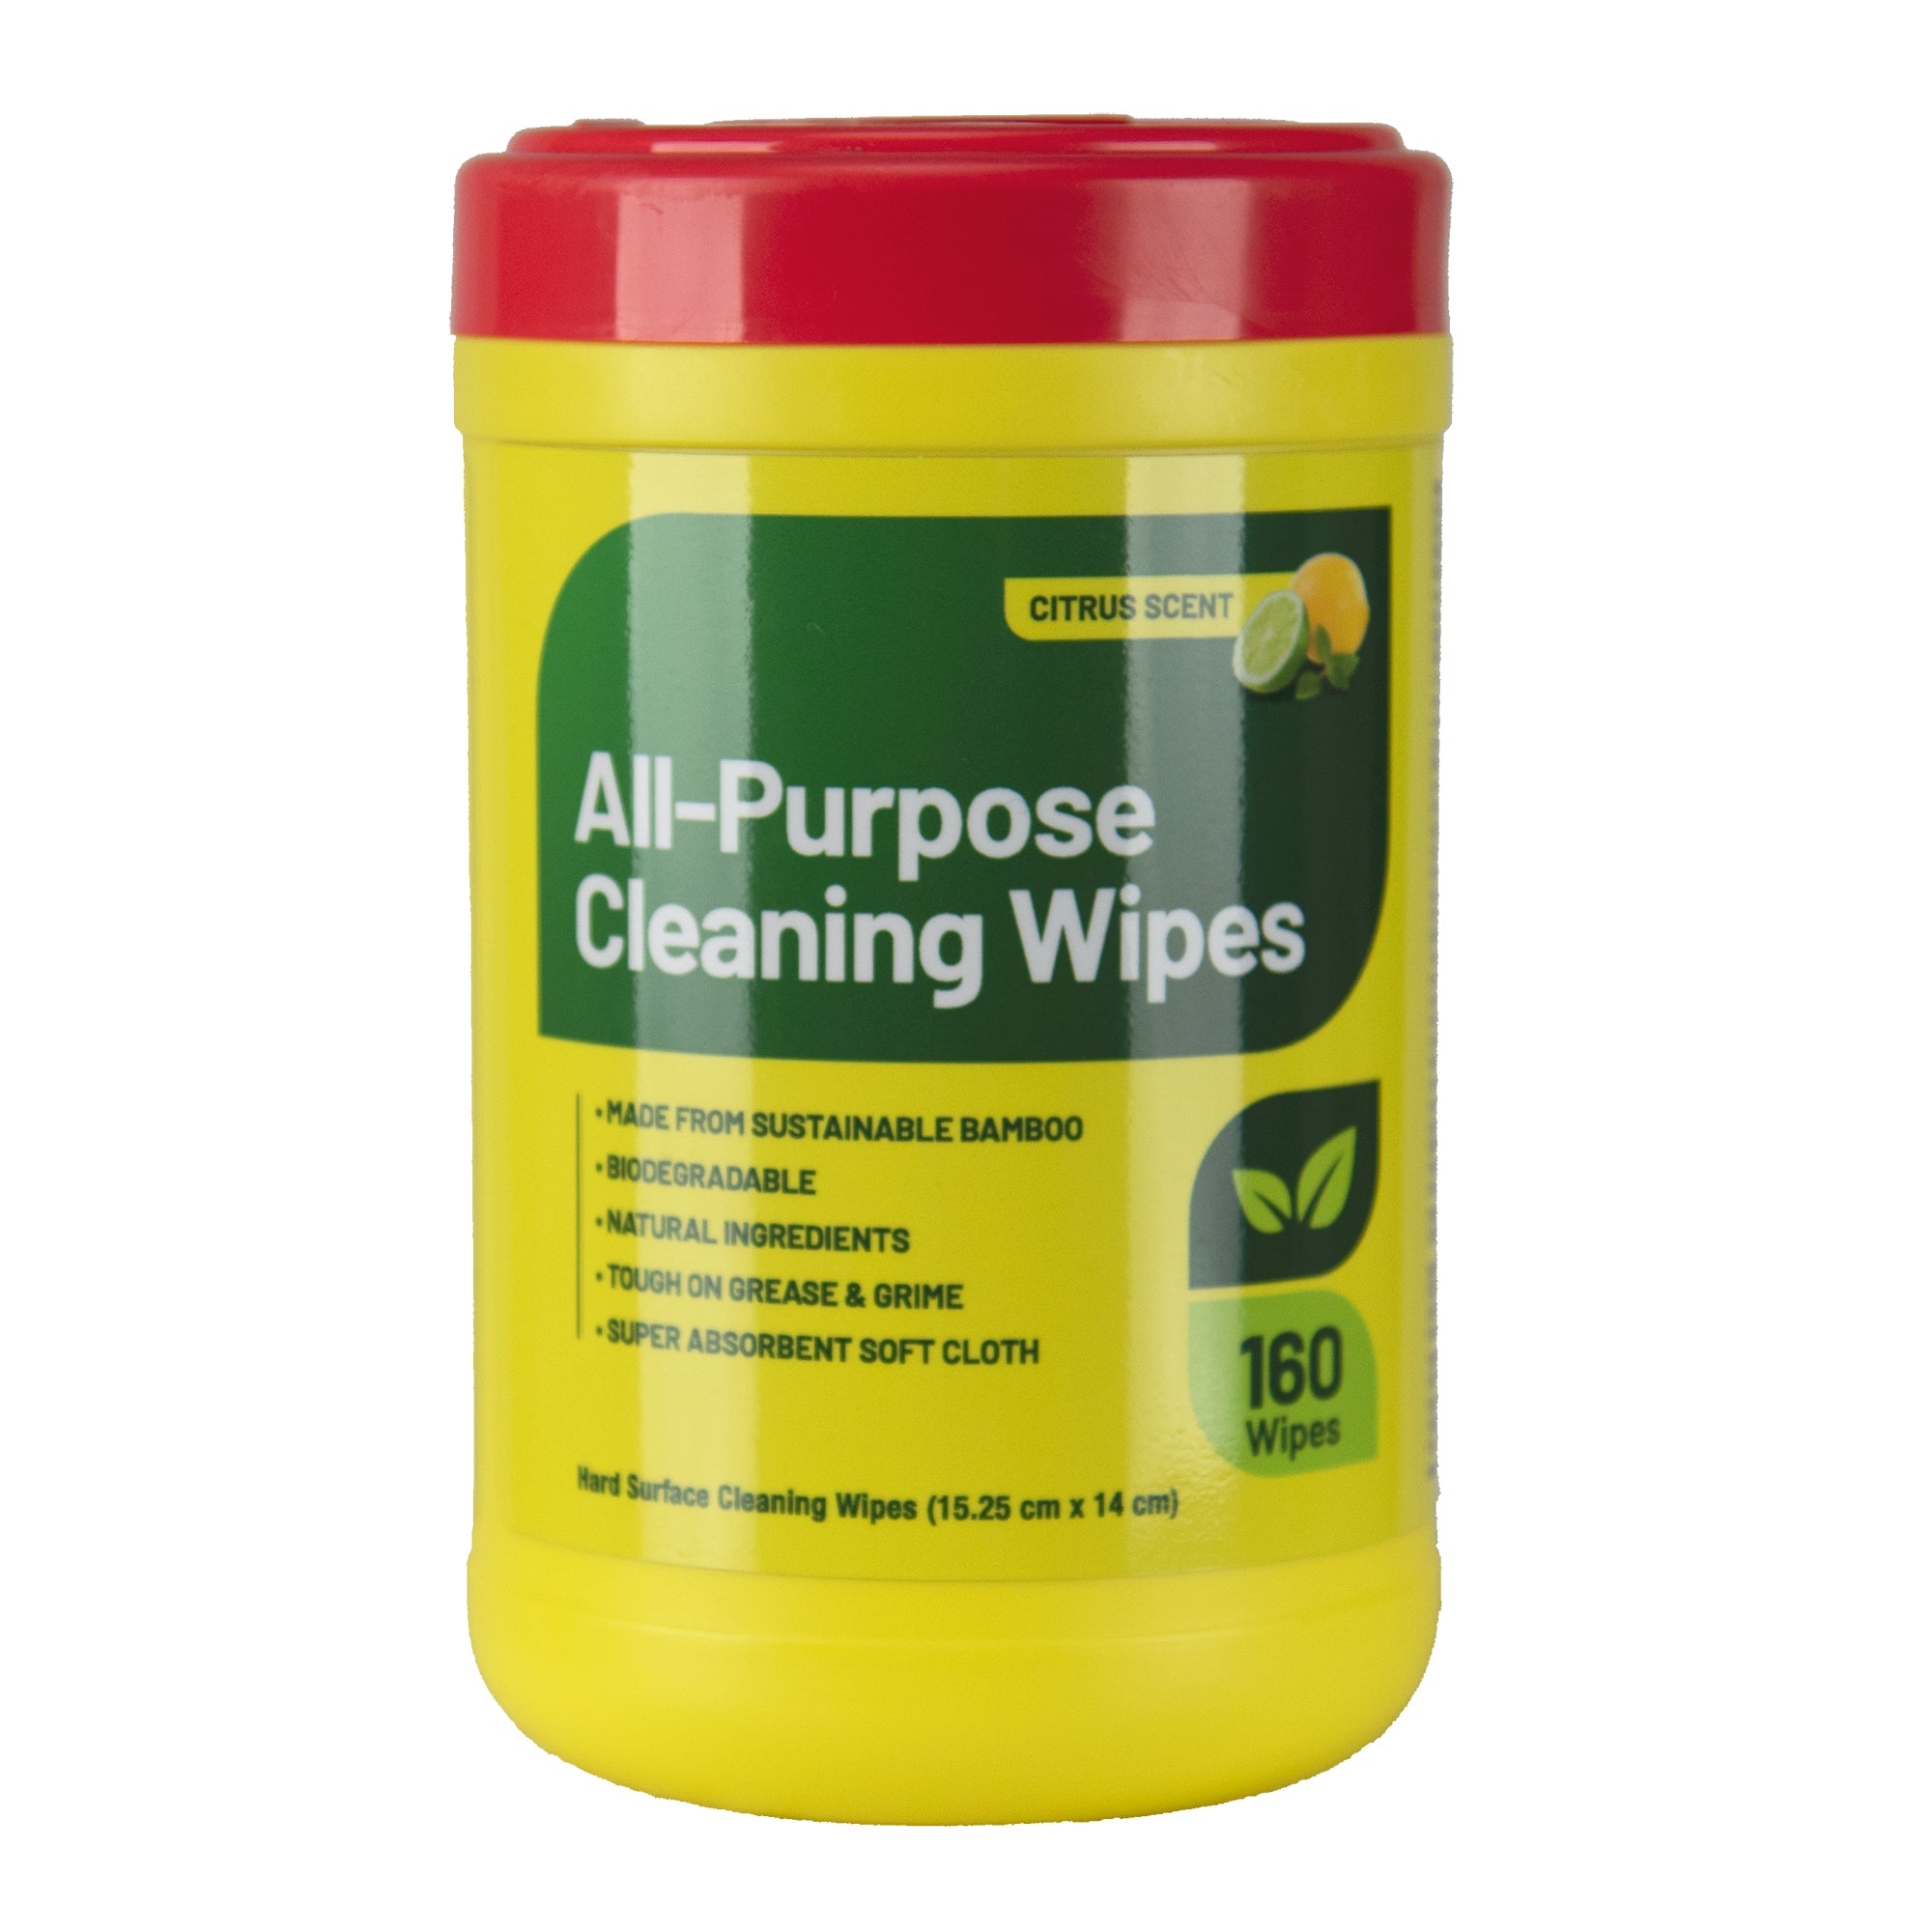 All-Purpose Cleaning Wipes, canister of 160 wipes on a white background